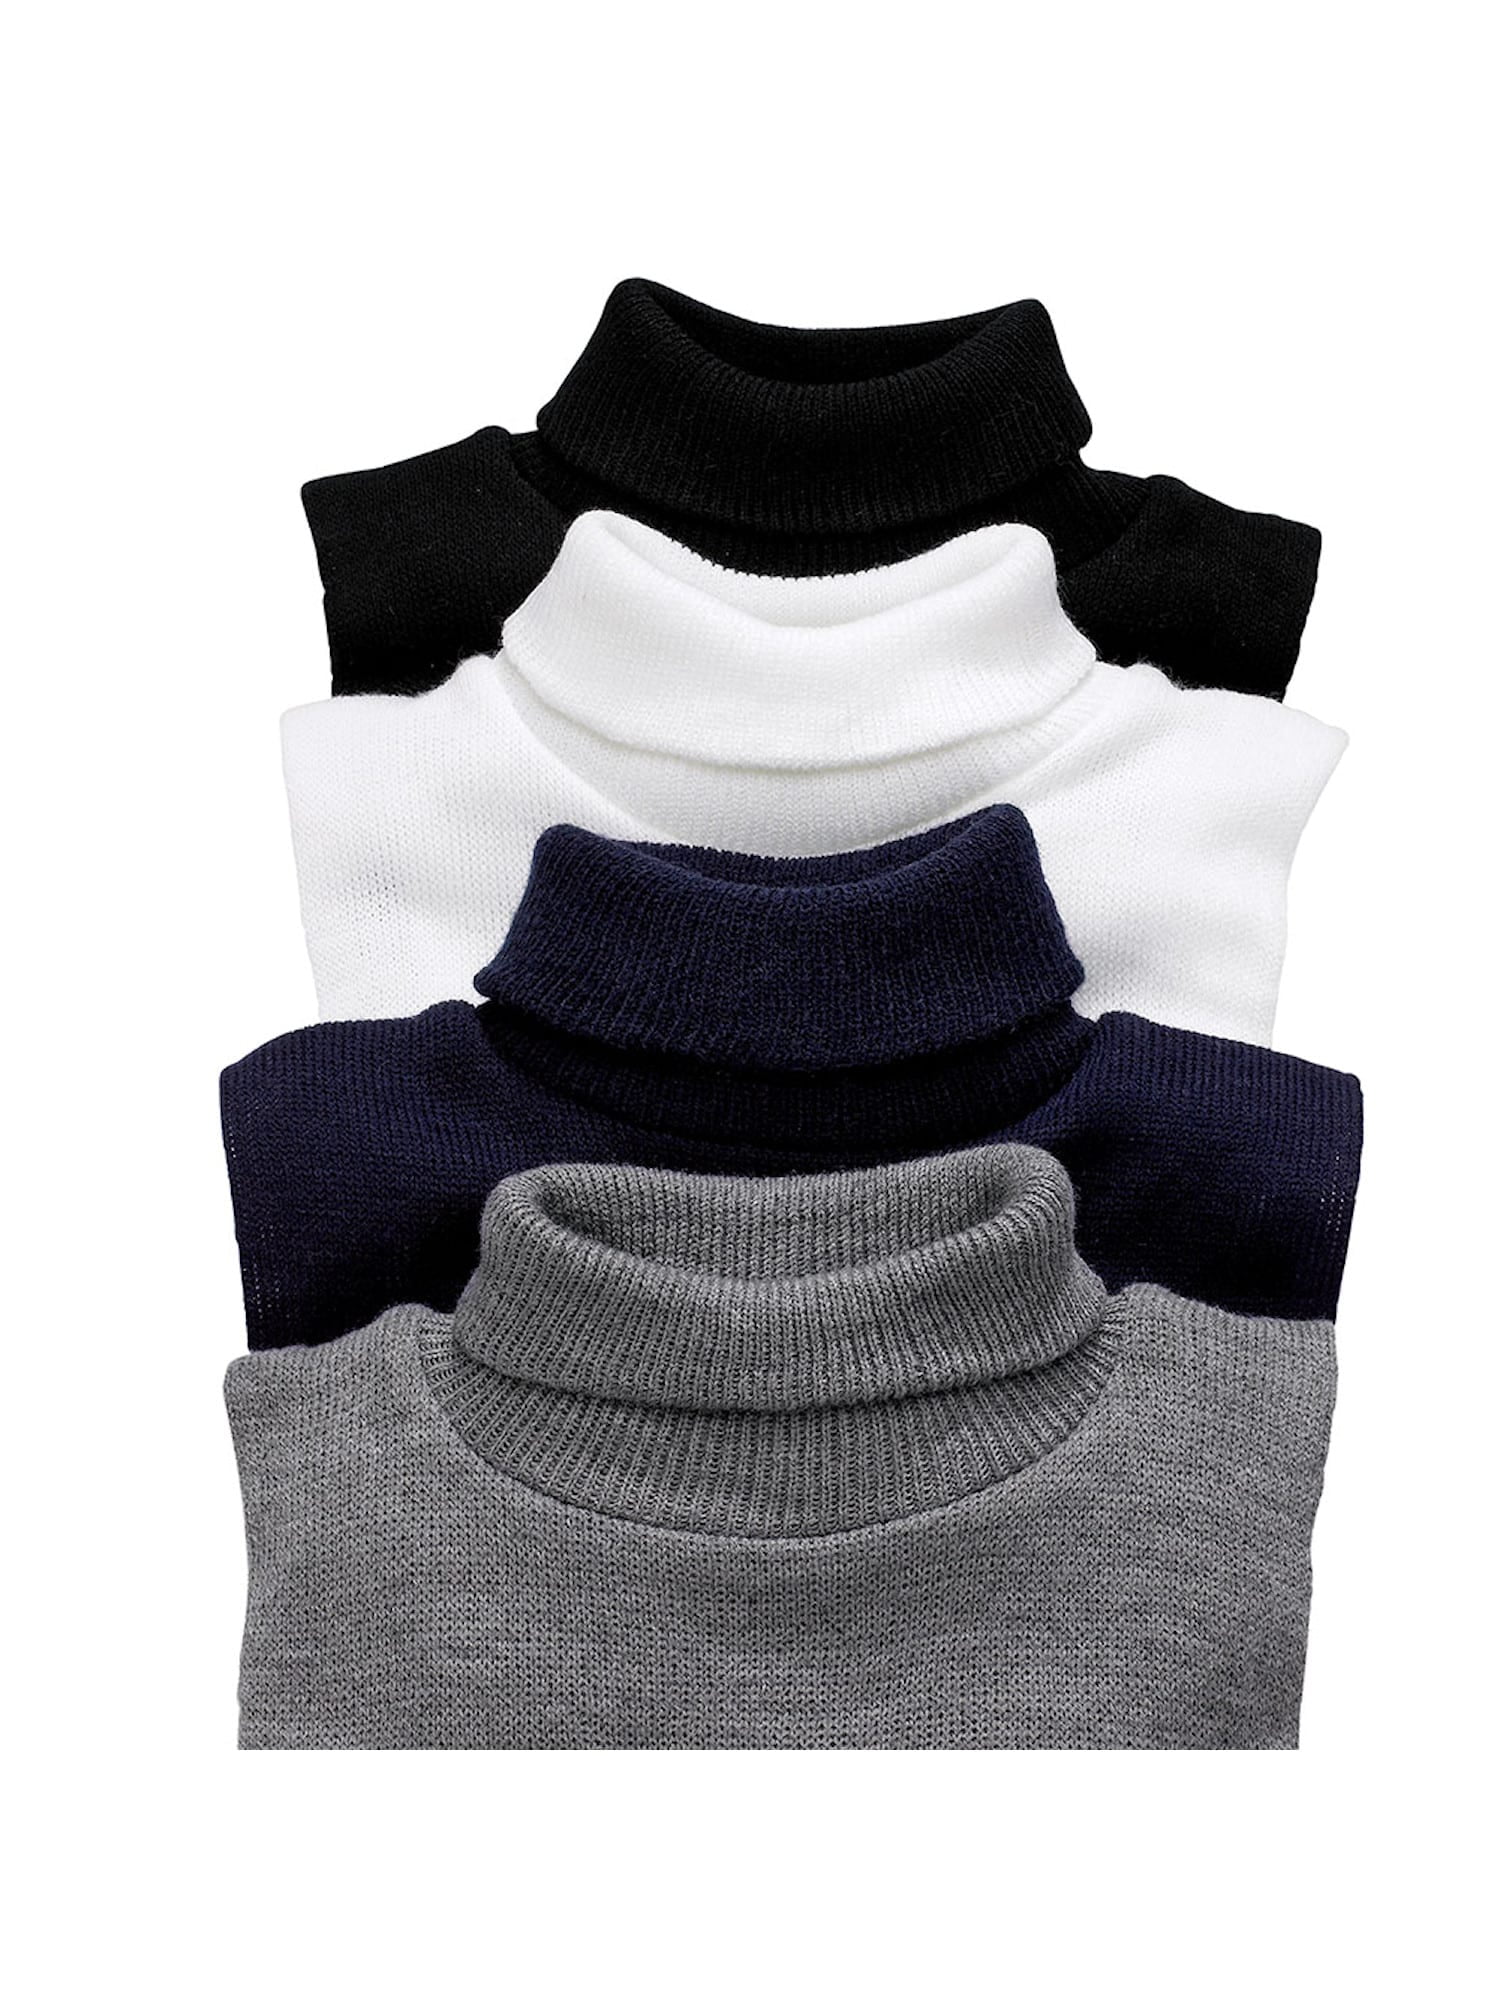 TURTLE NECK DICKIES 4-PACK 100% COTTON MADE IN USA DIRECT FROM MFG FREE SHIPPING 